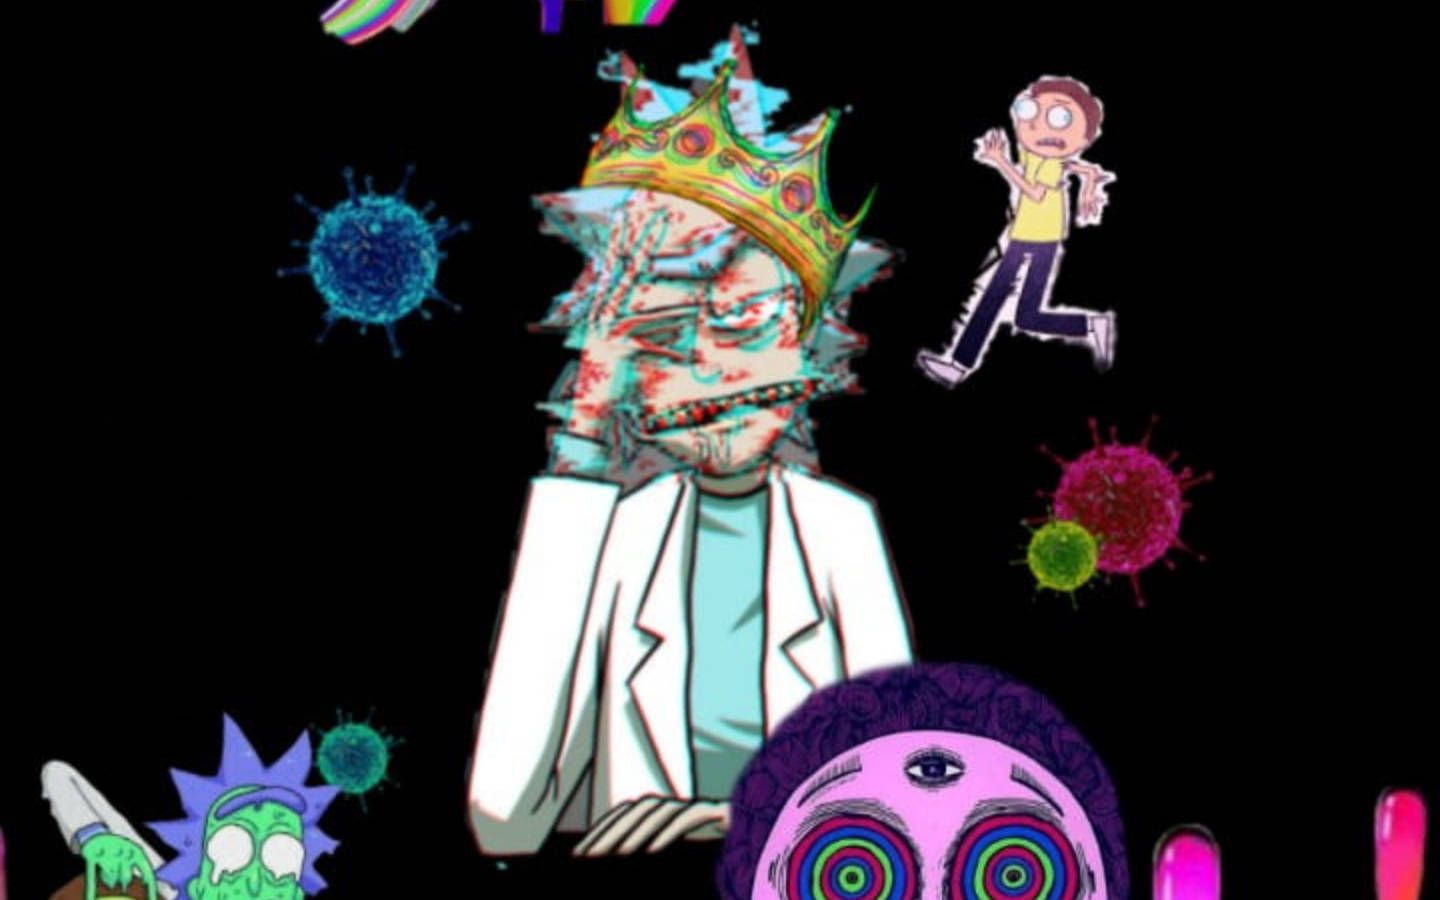 Rick And Morty Trippy Wallpaper Full HD, 4K Free to Use